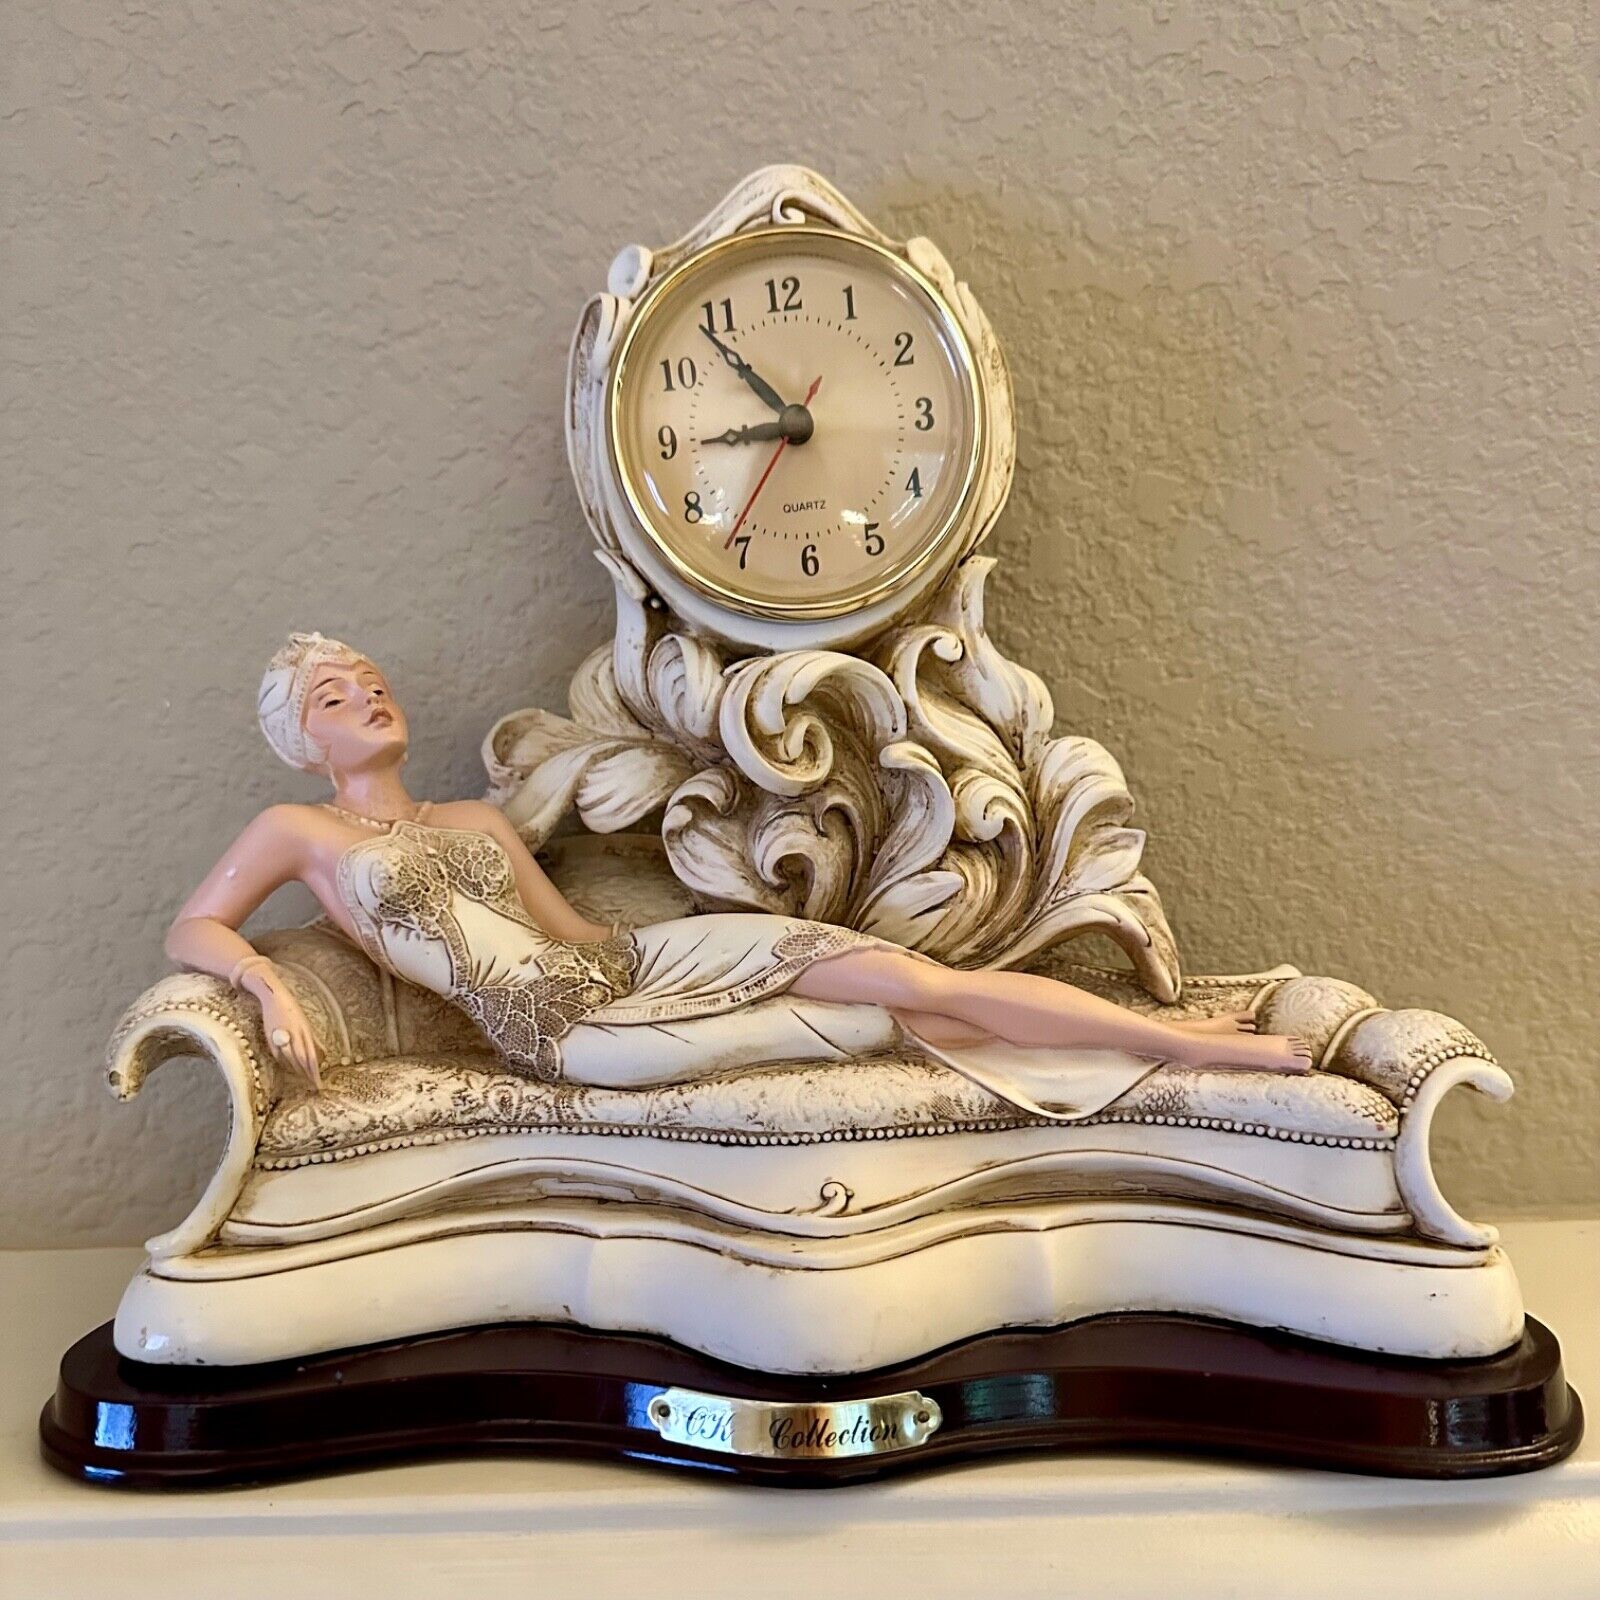 Art Deco, OK Collections, 1920s woman lounging on a sofa, Mid Century clock